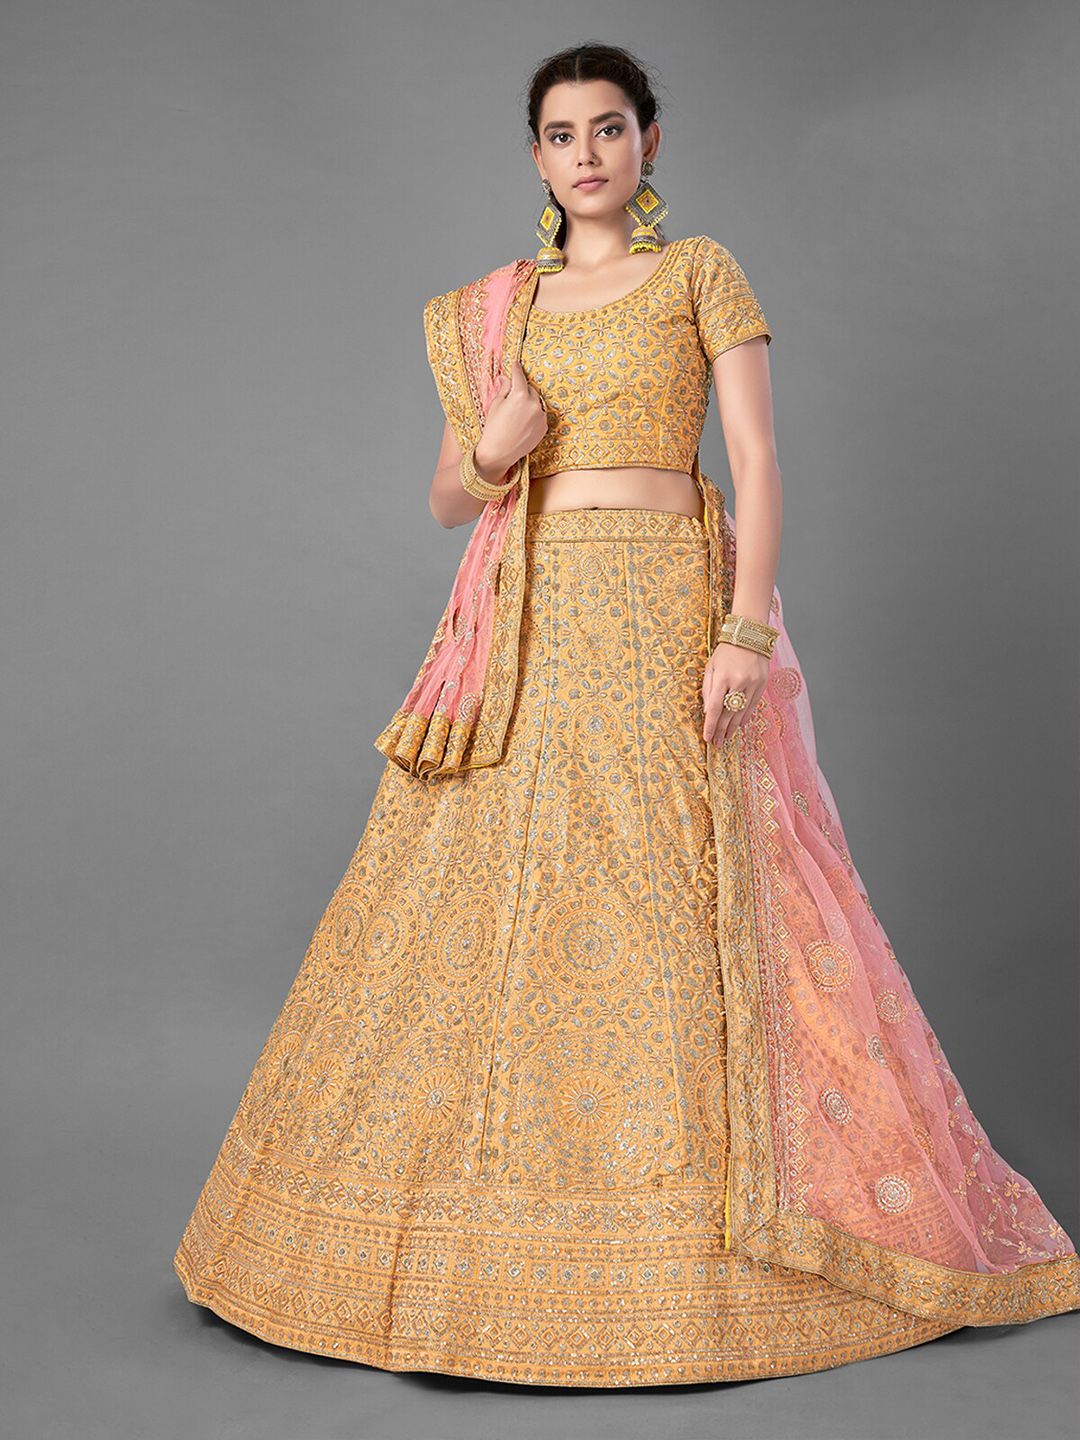 ODETTE Embroidered Thread Work Semi-Stitched Lehenga & Unstitched Blouse With Dupatta Price in India